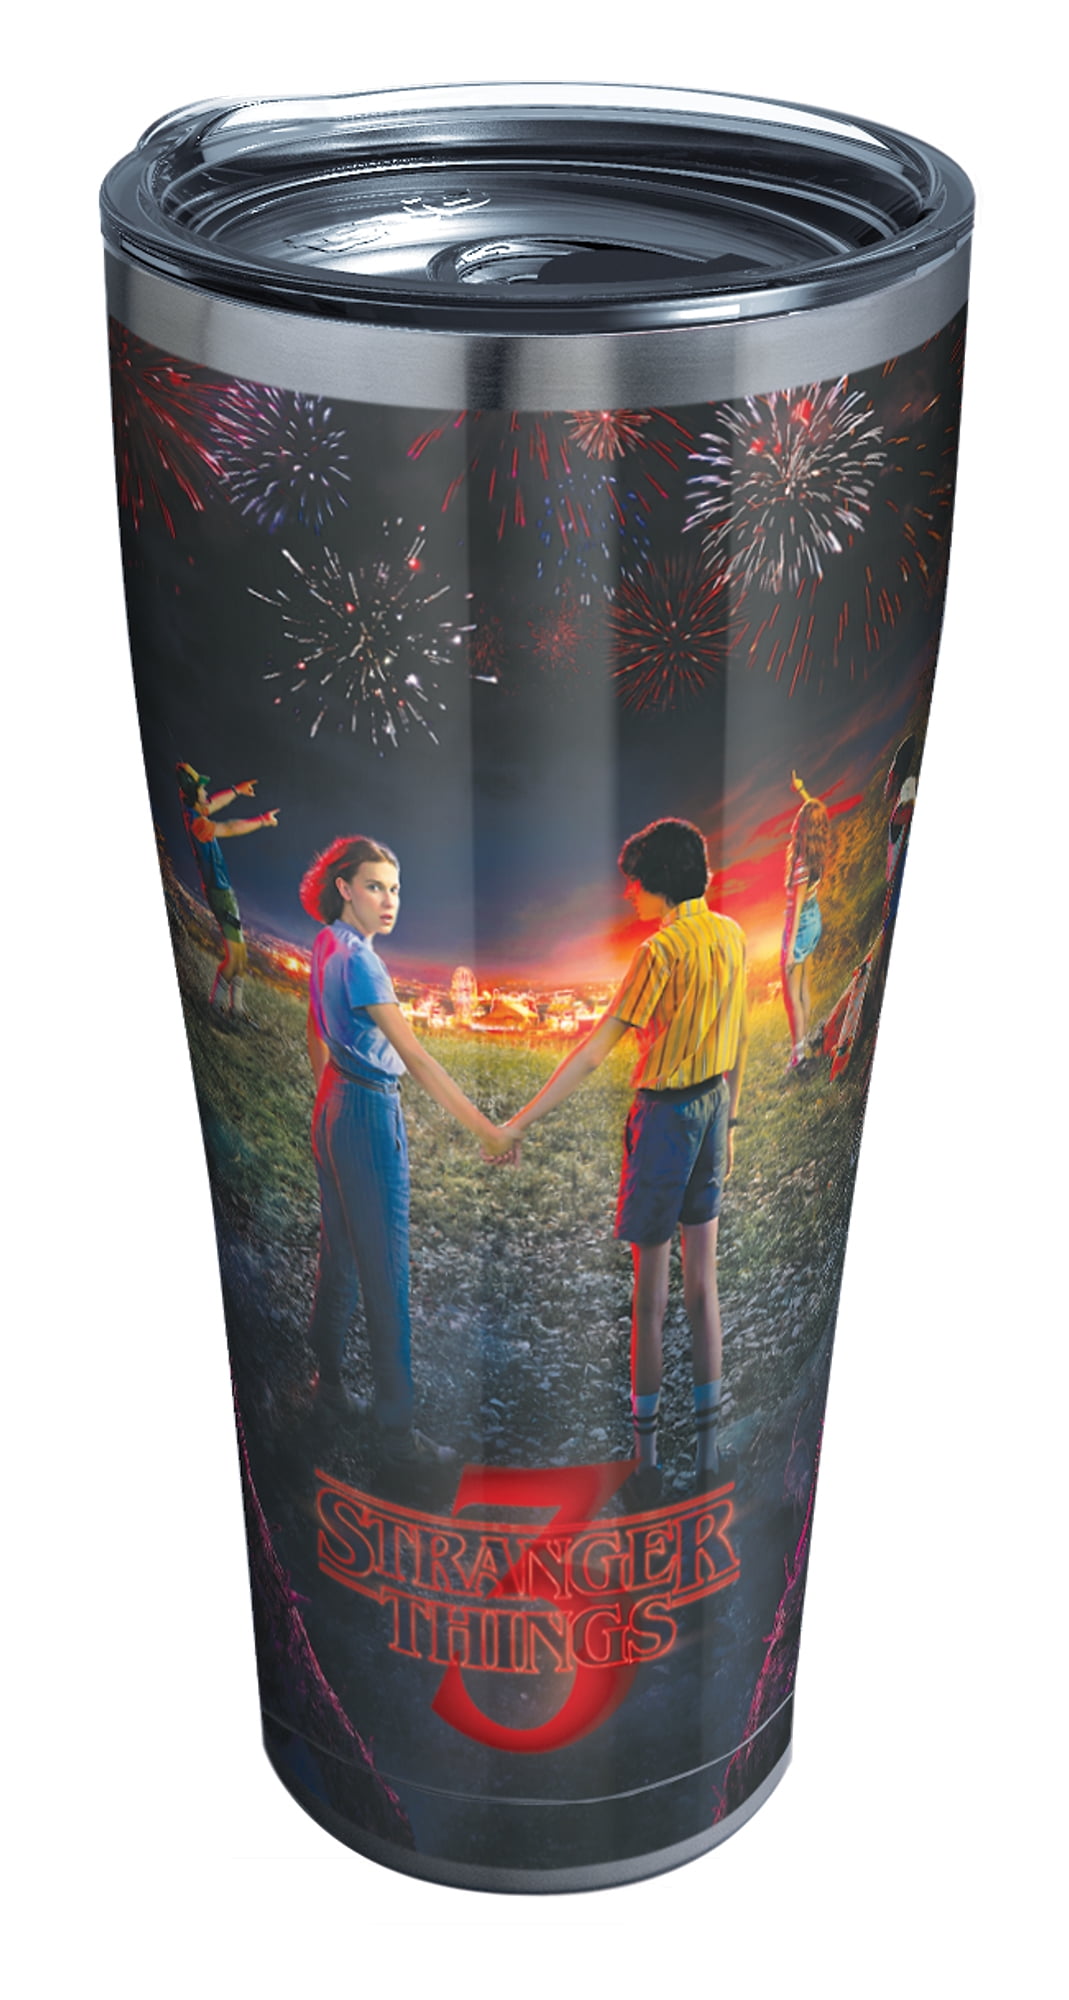 2 stranger things cups getting their - Tumblers and Beyond